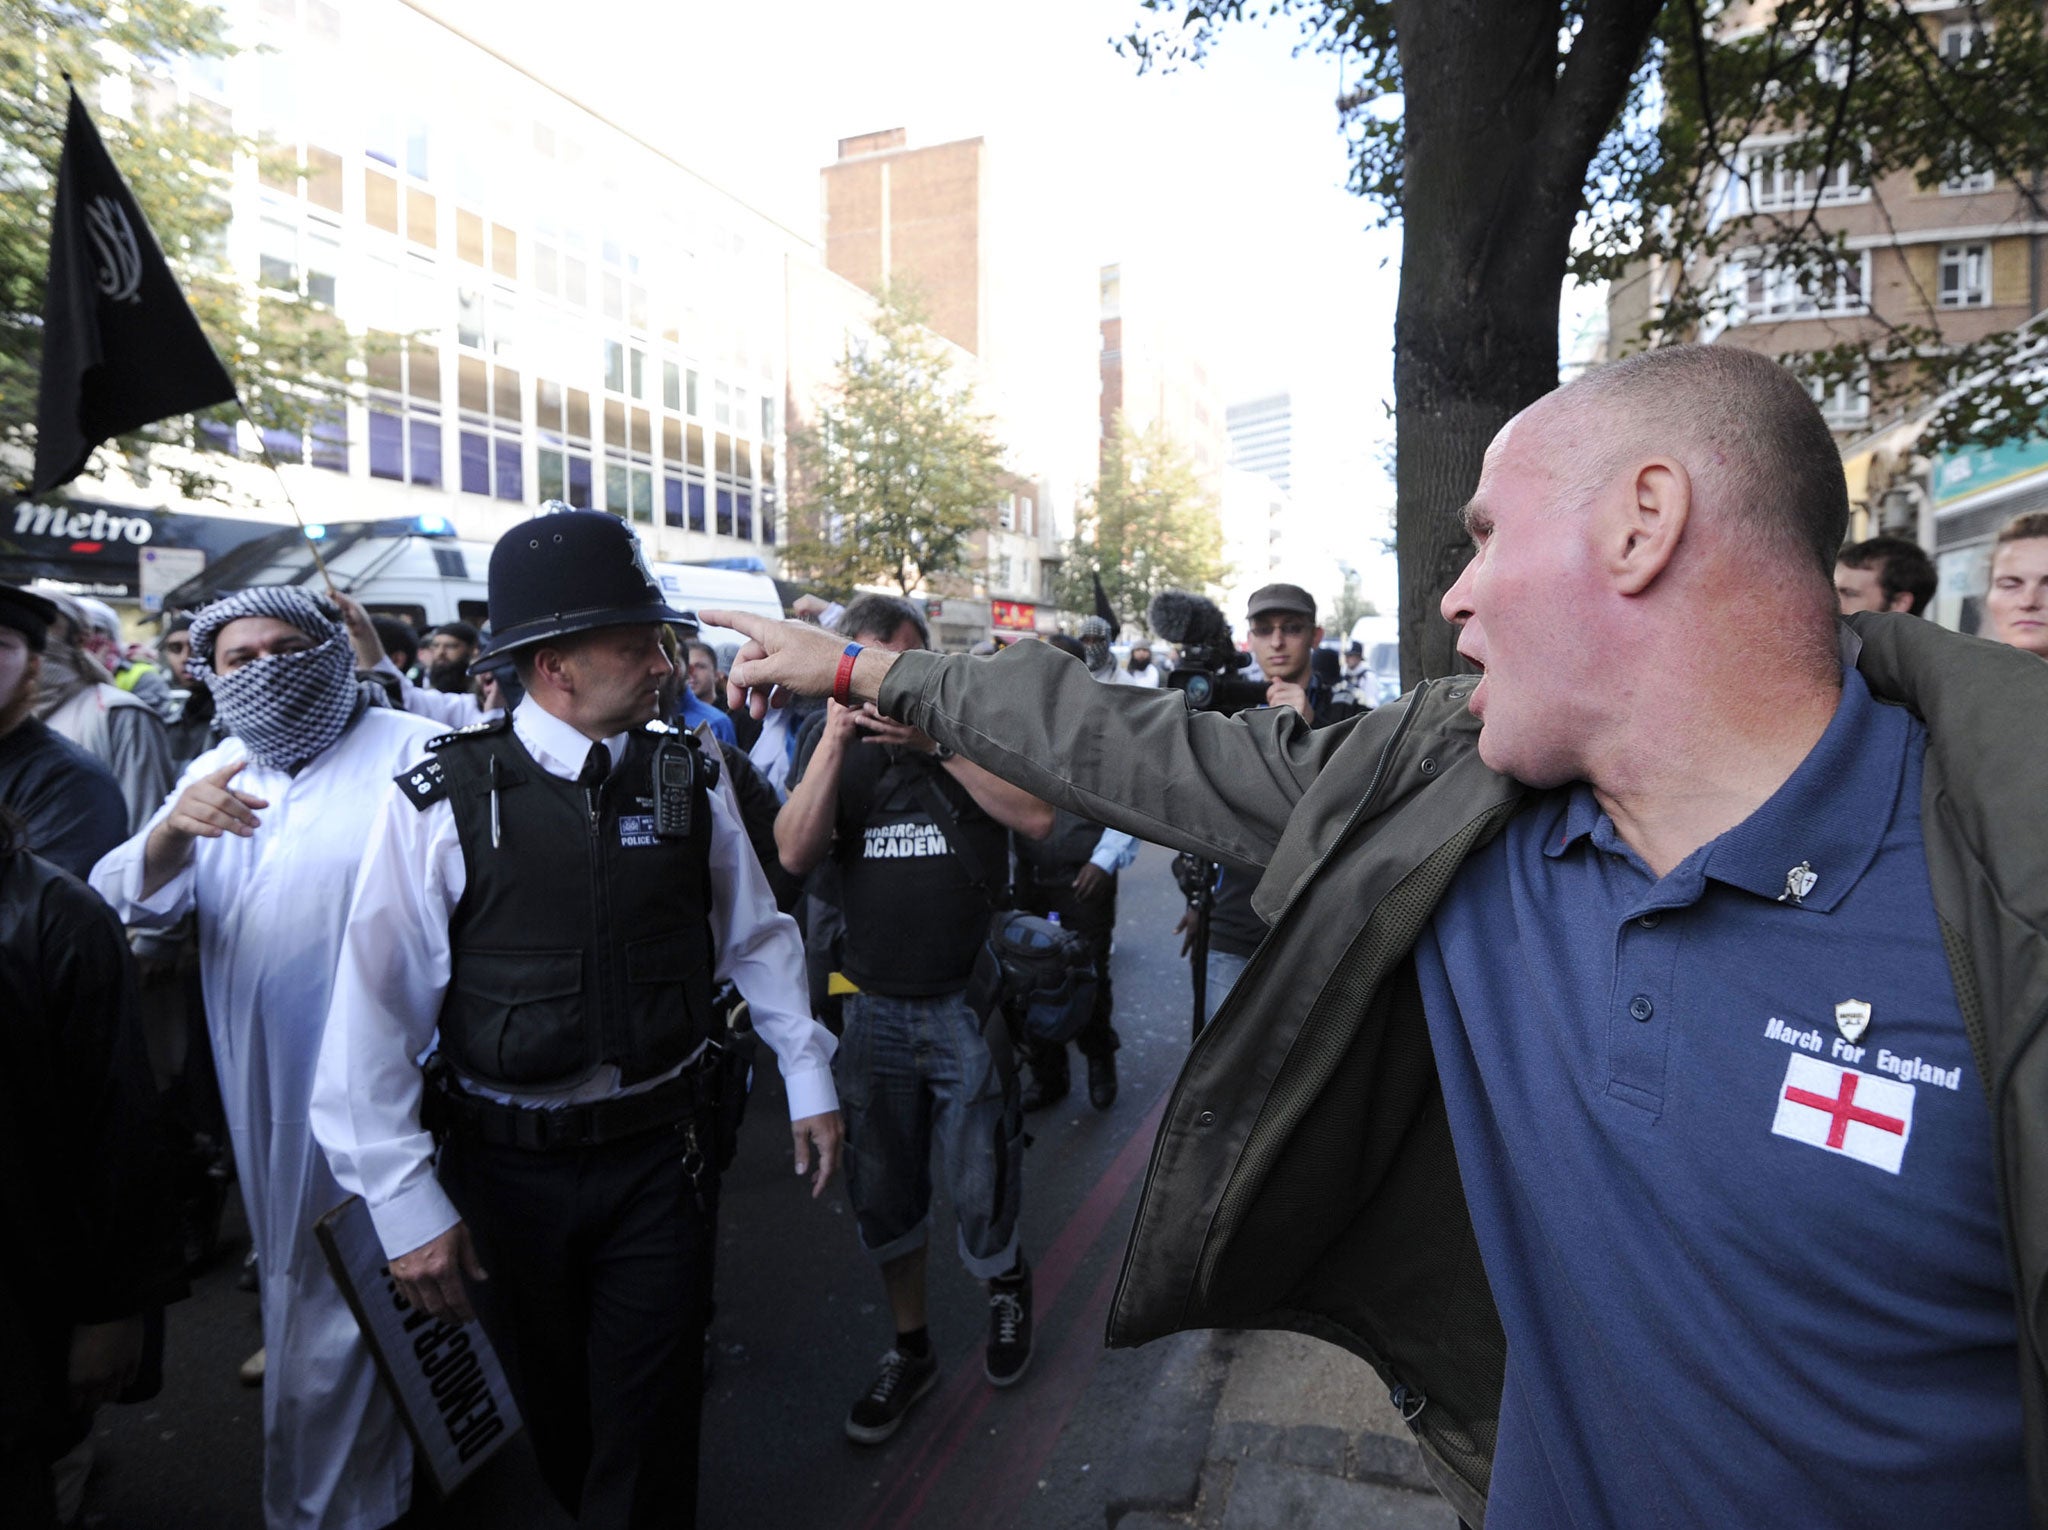 A member of the right-wing English Defence League (EDL) shouts at police escorting Islamist demonstrators after their protest outside the US embassy in London on September 11, 2011 during a ceremony to mark the 10th anniversary of the 9/11 attacks on the United States.